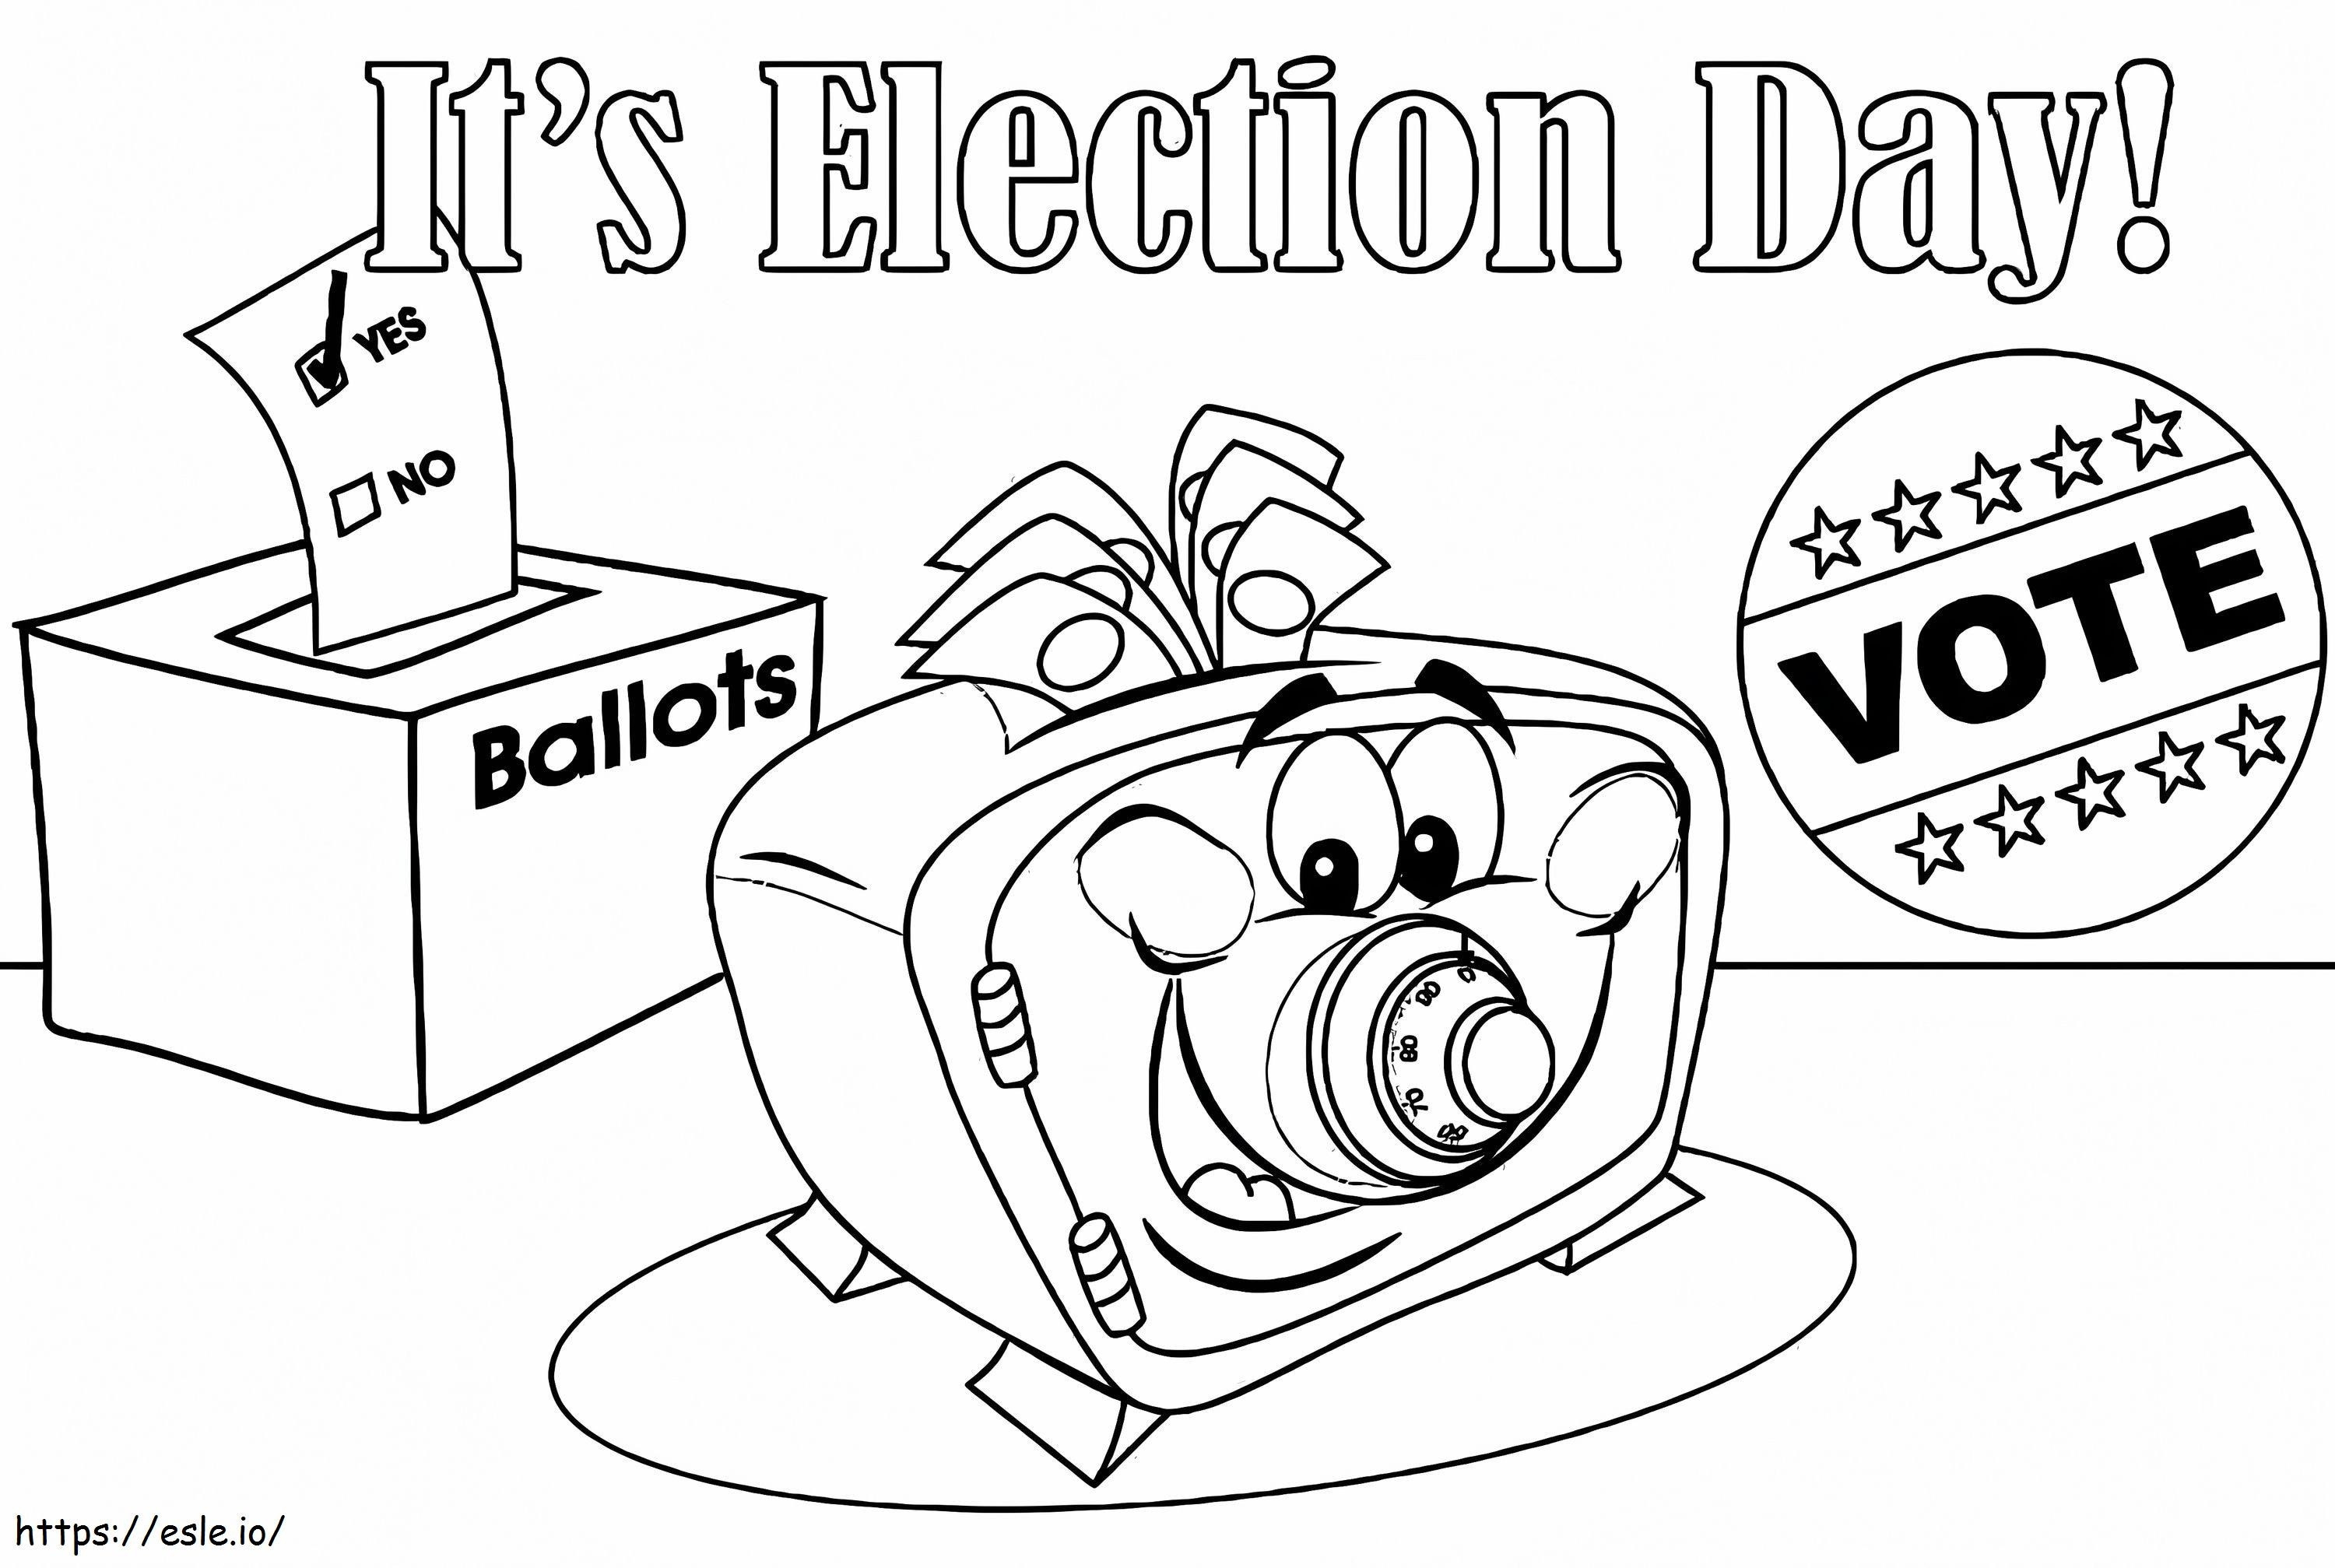 Its Election Day coloring page